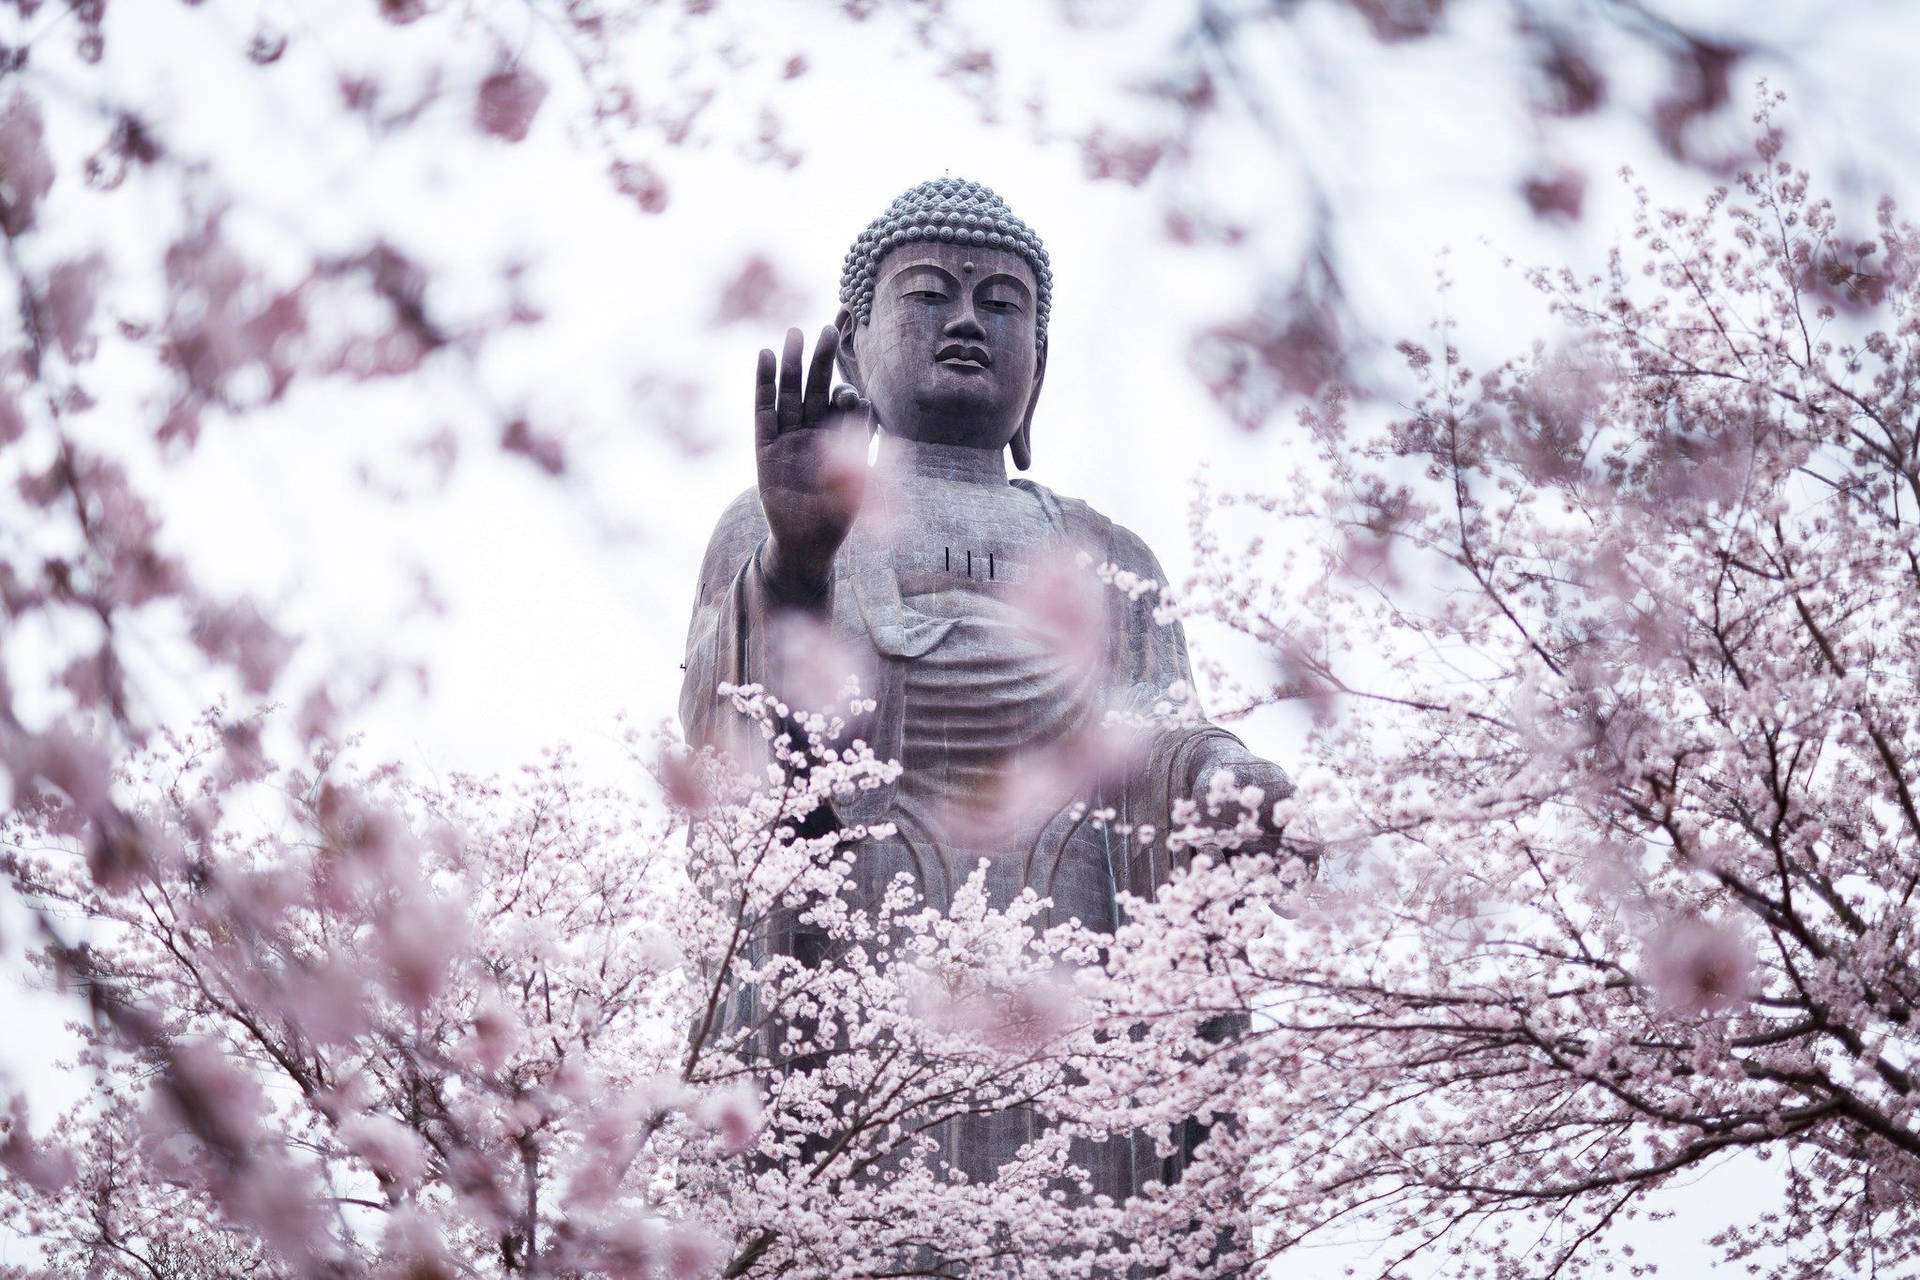 A snowy winter day in front of a serene Buddha statue. Wallpaper